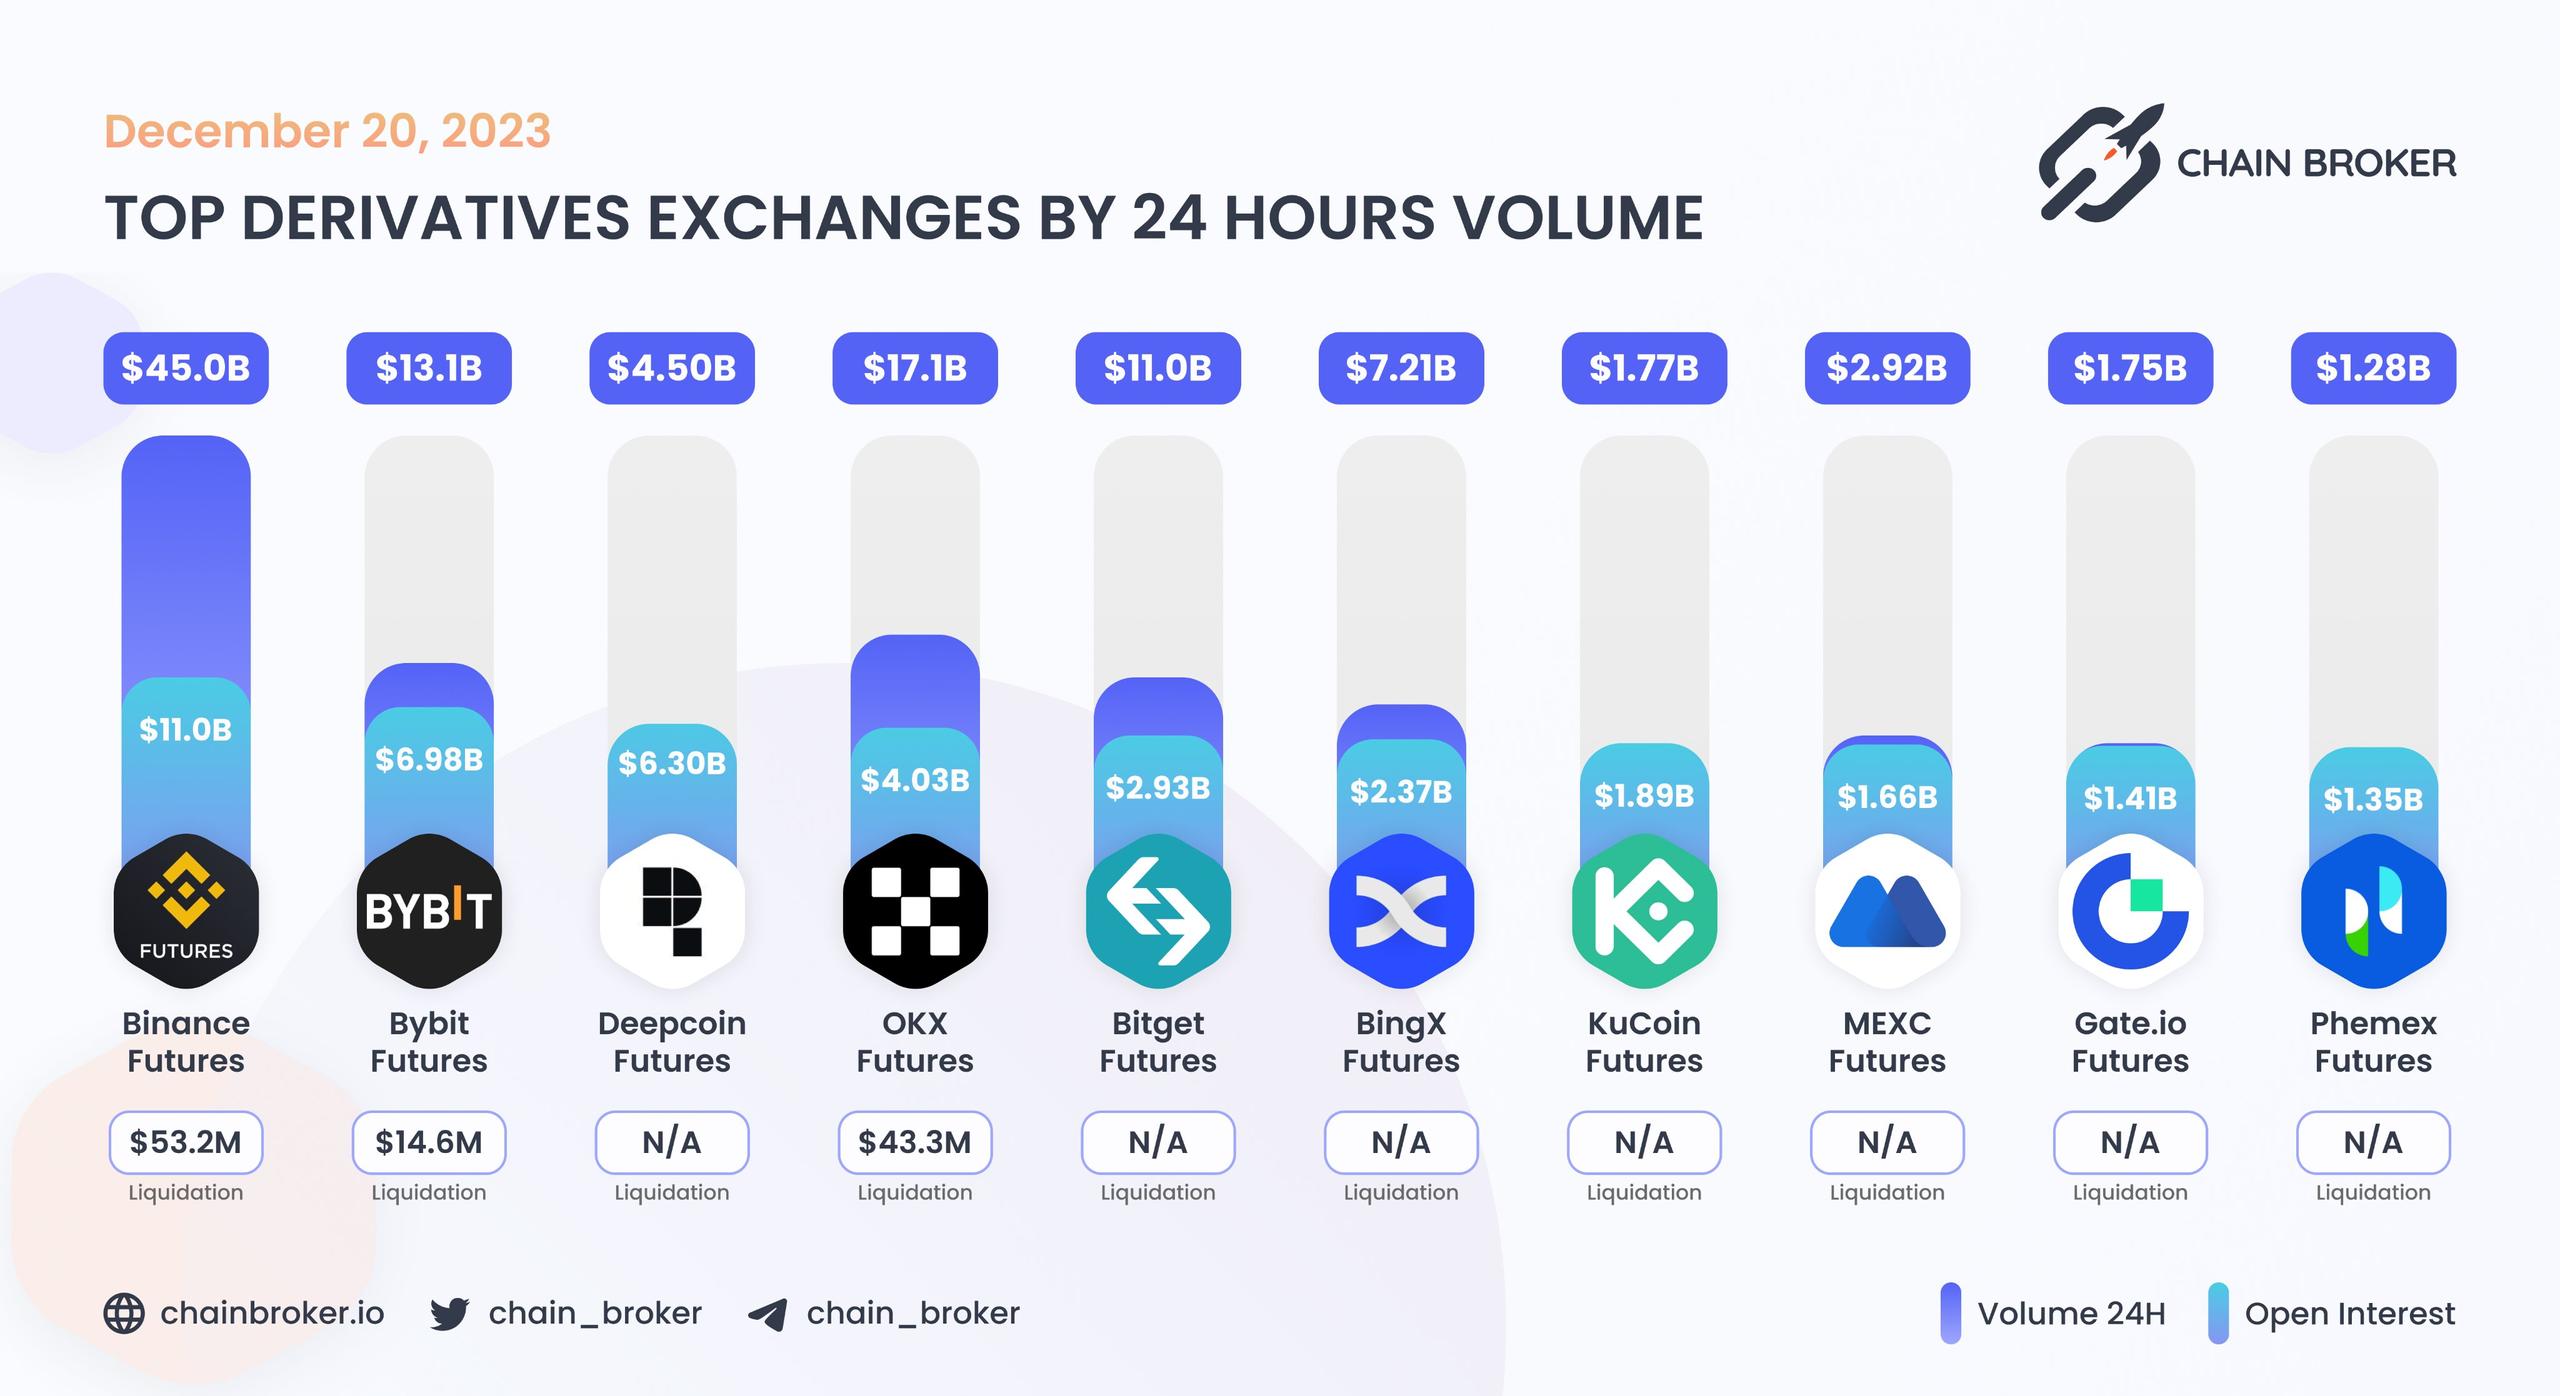 Top derivatives exchanges by 24H Volume